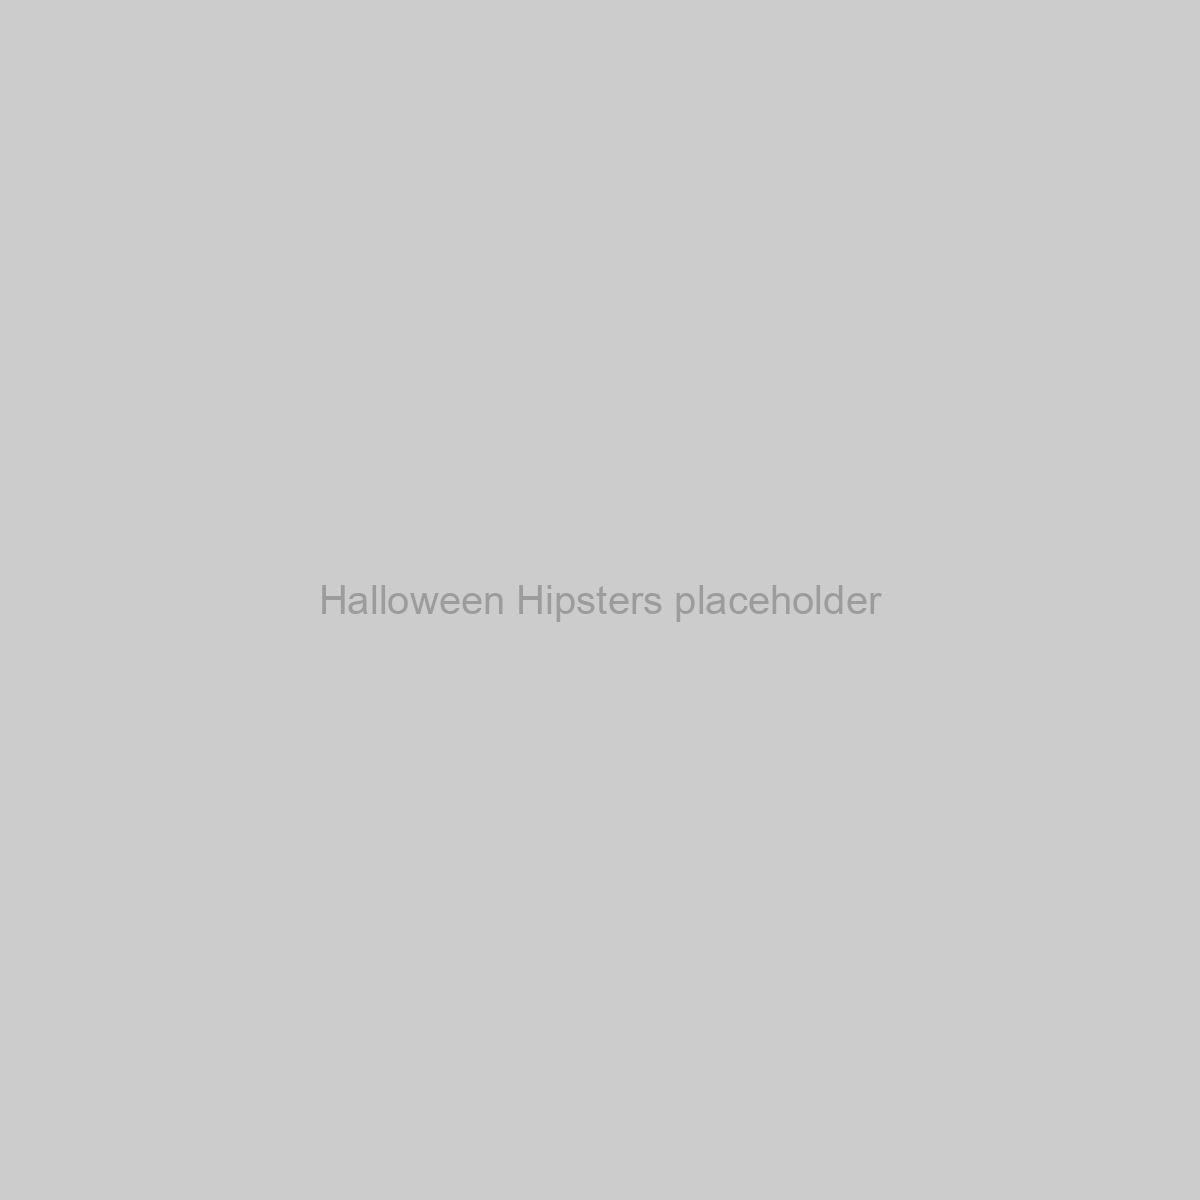 Halloween Hipsters Placeholder Image